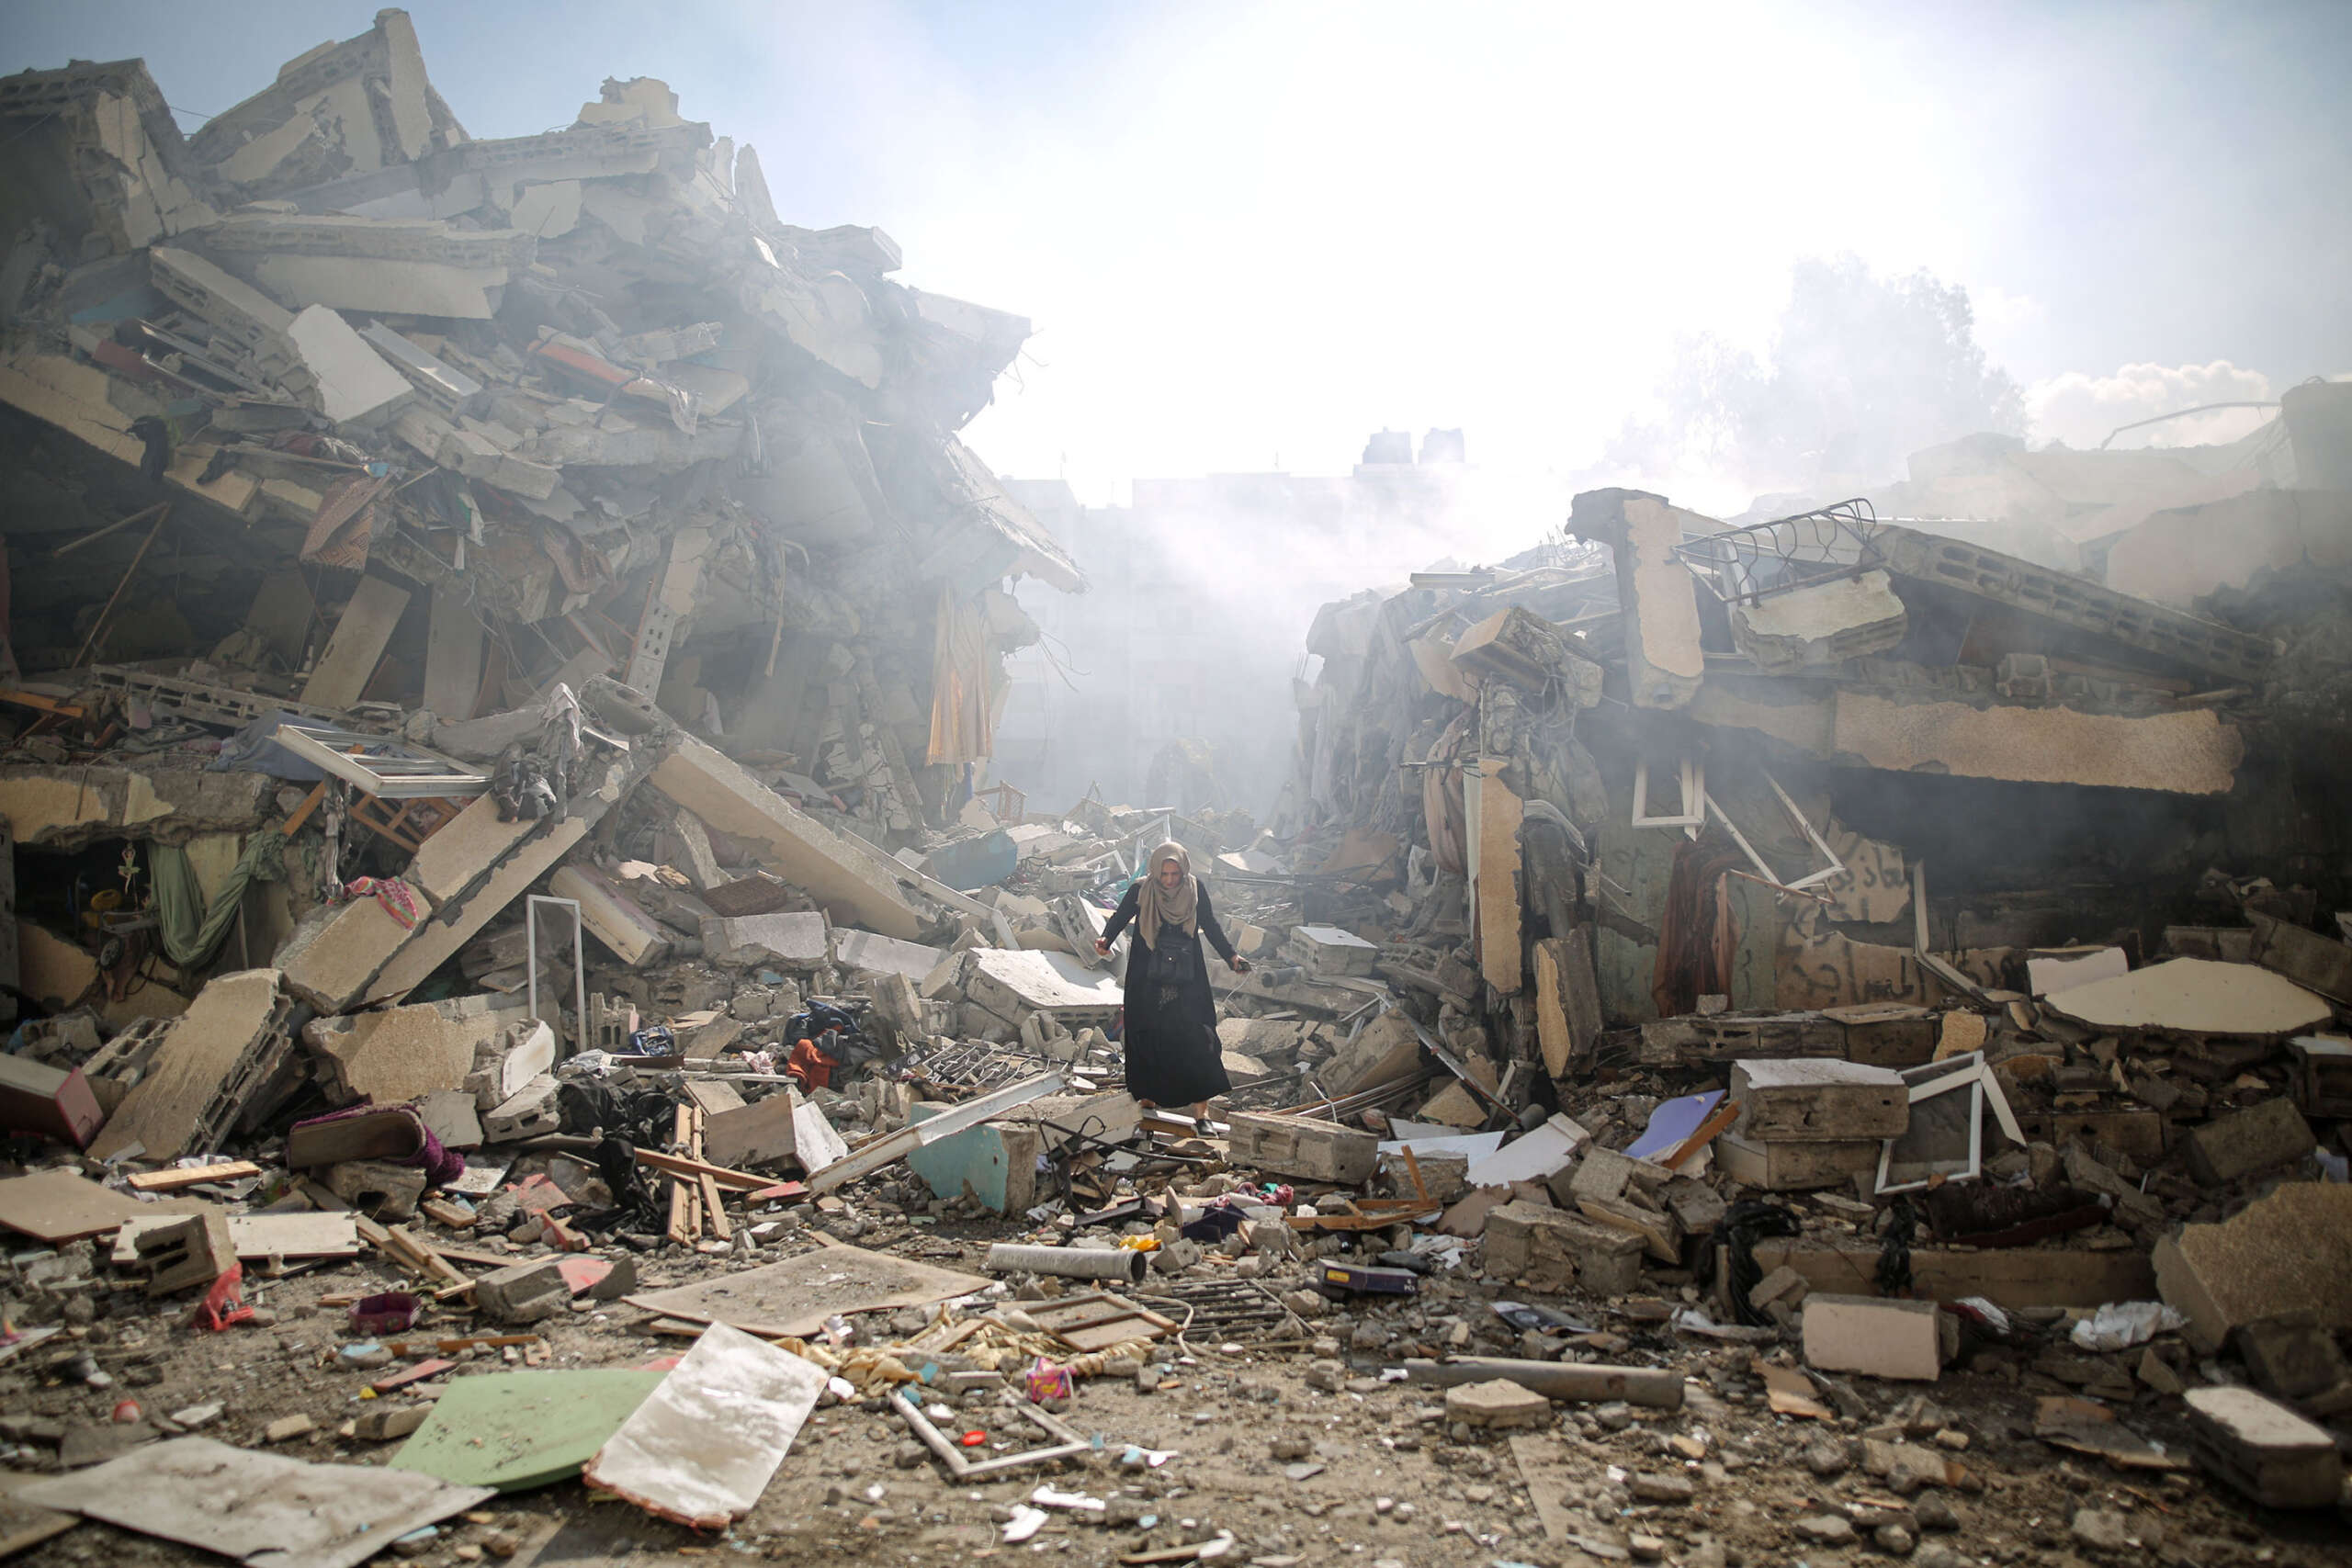 Oxfam Leader Says Humanitarian Crisis in Gaza Is Worst They’ve Ever Se…